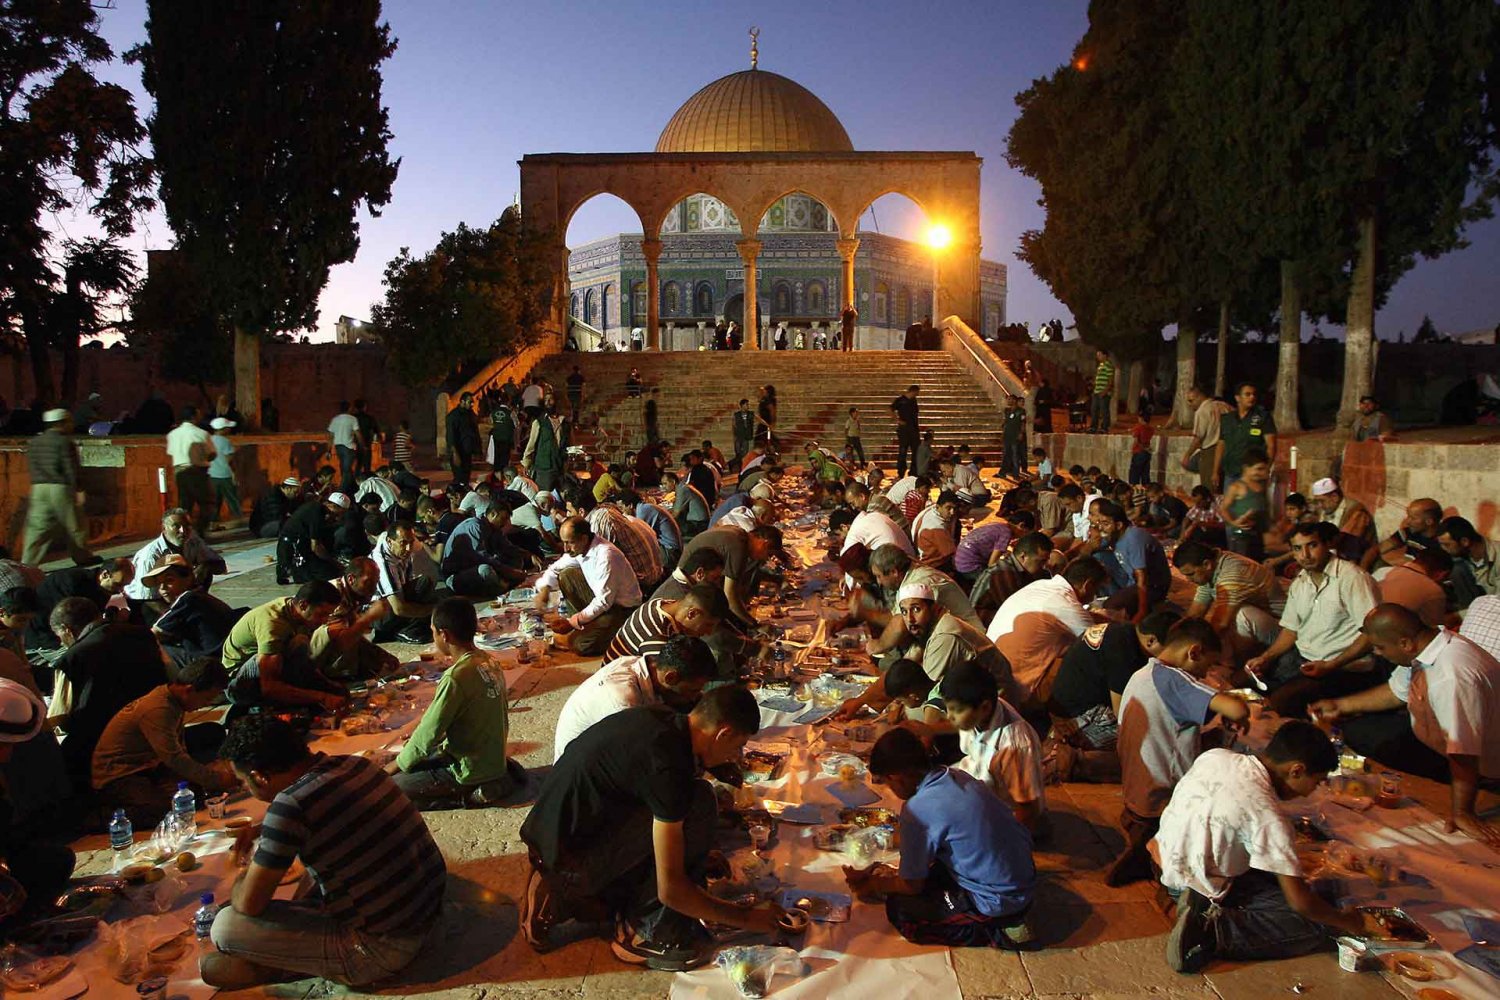 Palestinian during a charity Ramadan iftar feast outside the Dome of the Rock in Jerusalem, August 27, 2009.